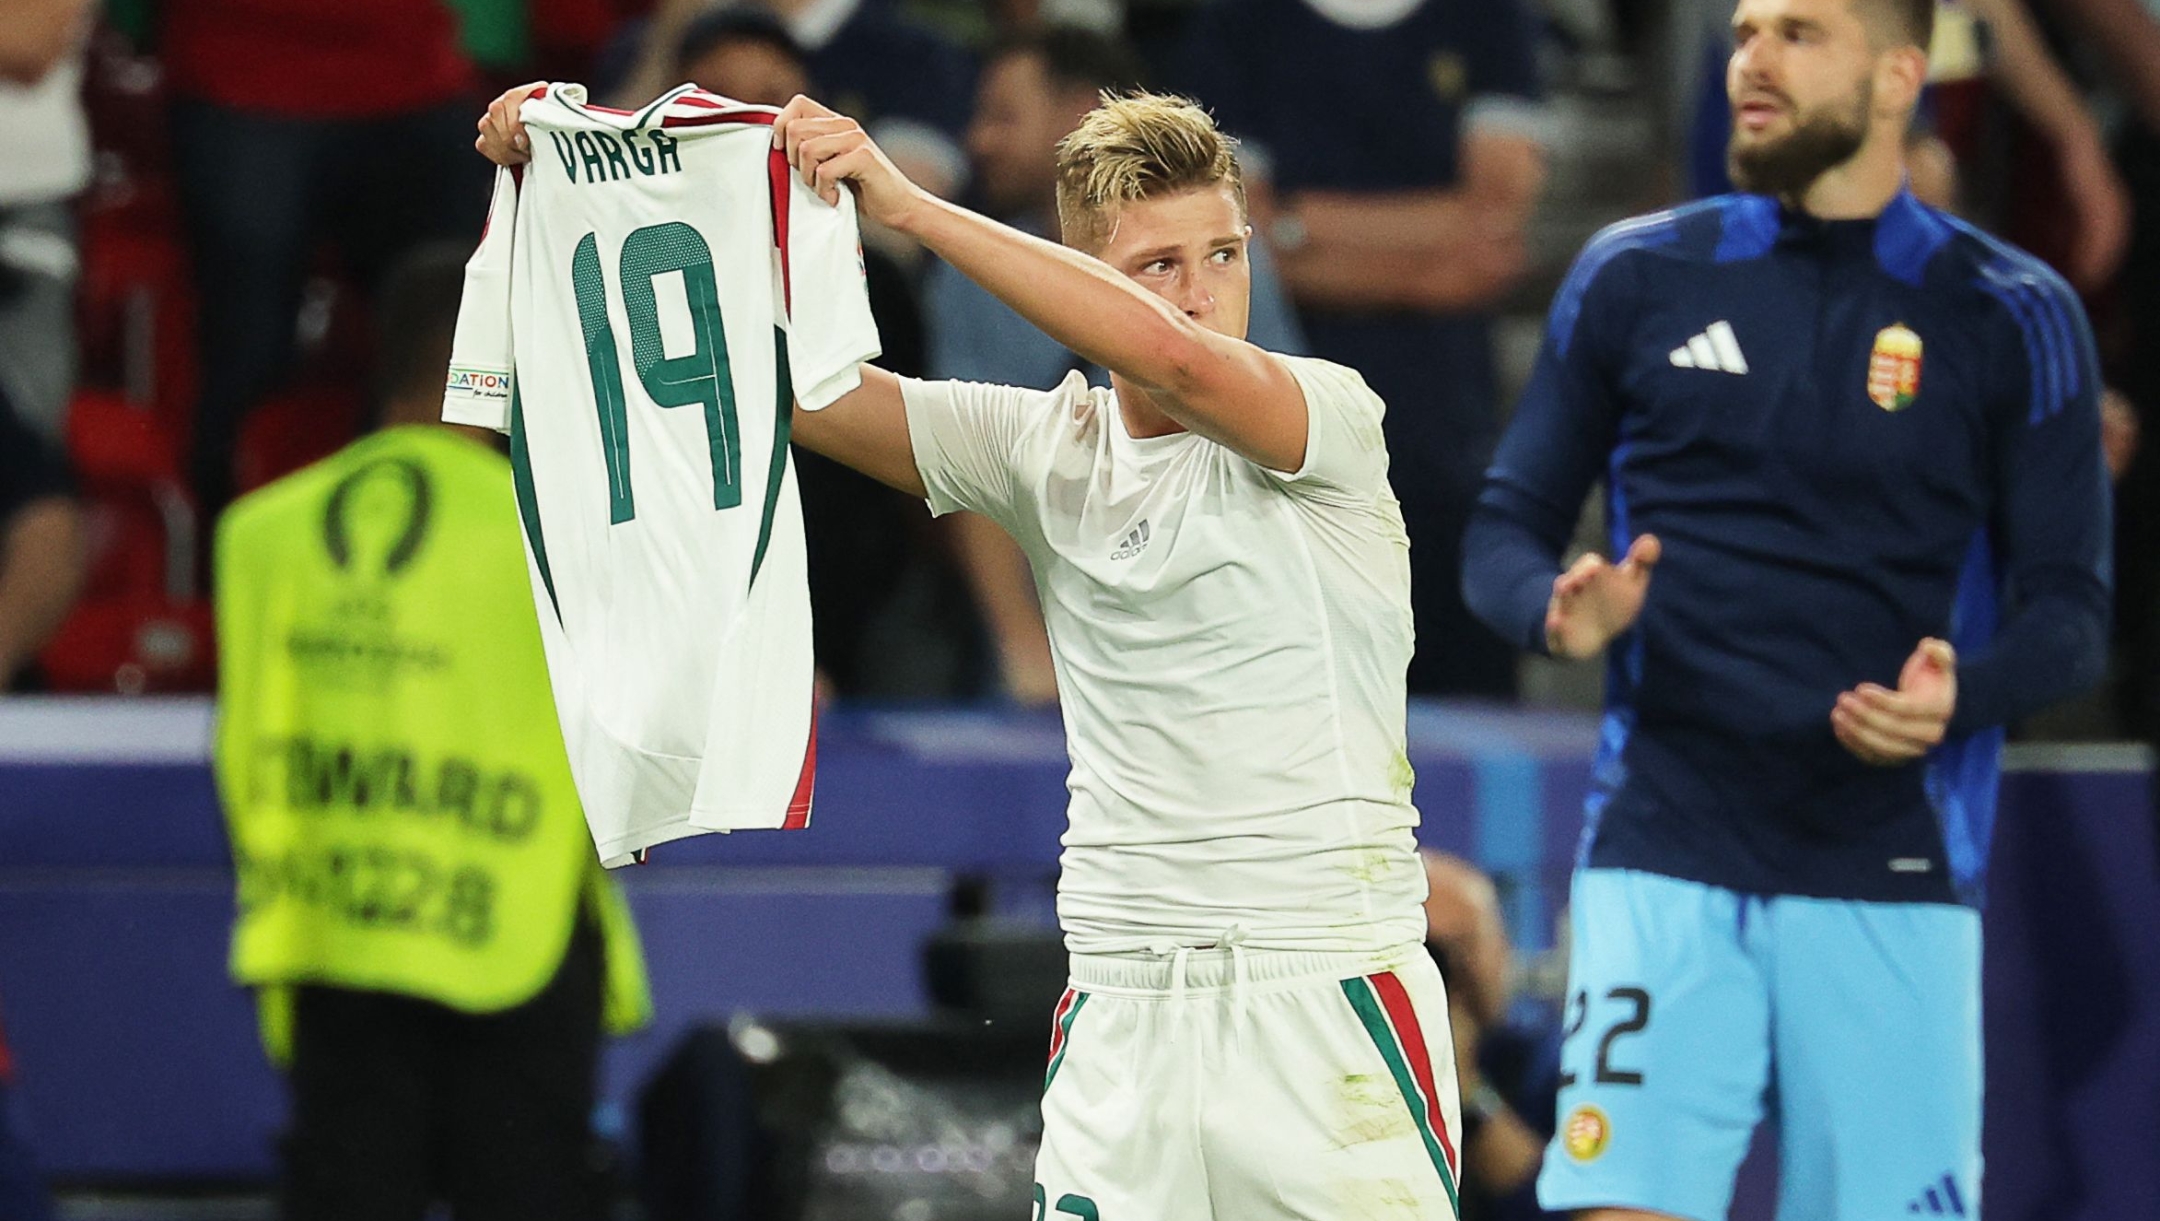 Hungary's forward #23 Kevin Csoboth holds Hungary's forward #19 Barnabas Varga's jersey to celebrate scoring his team's first goal during the UEFA Euro 2024 Group A football match between Scotland and Hungary at the Stuttgart Arena in Stuttgart on June 23, 2024. (Photo by LLUIS GENE / AFP)